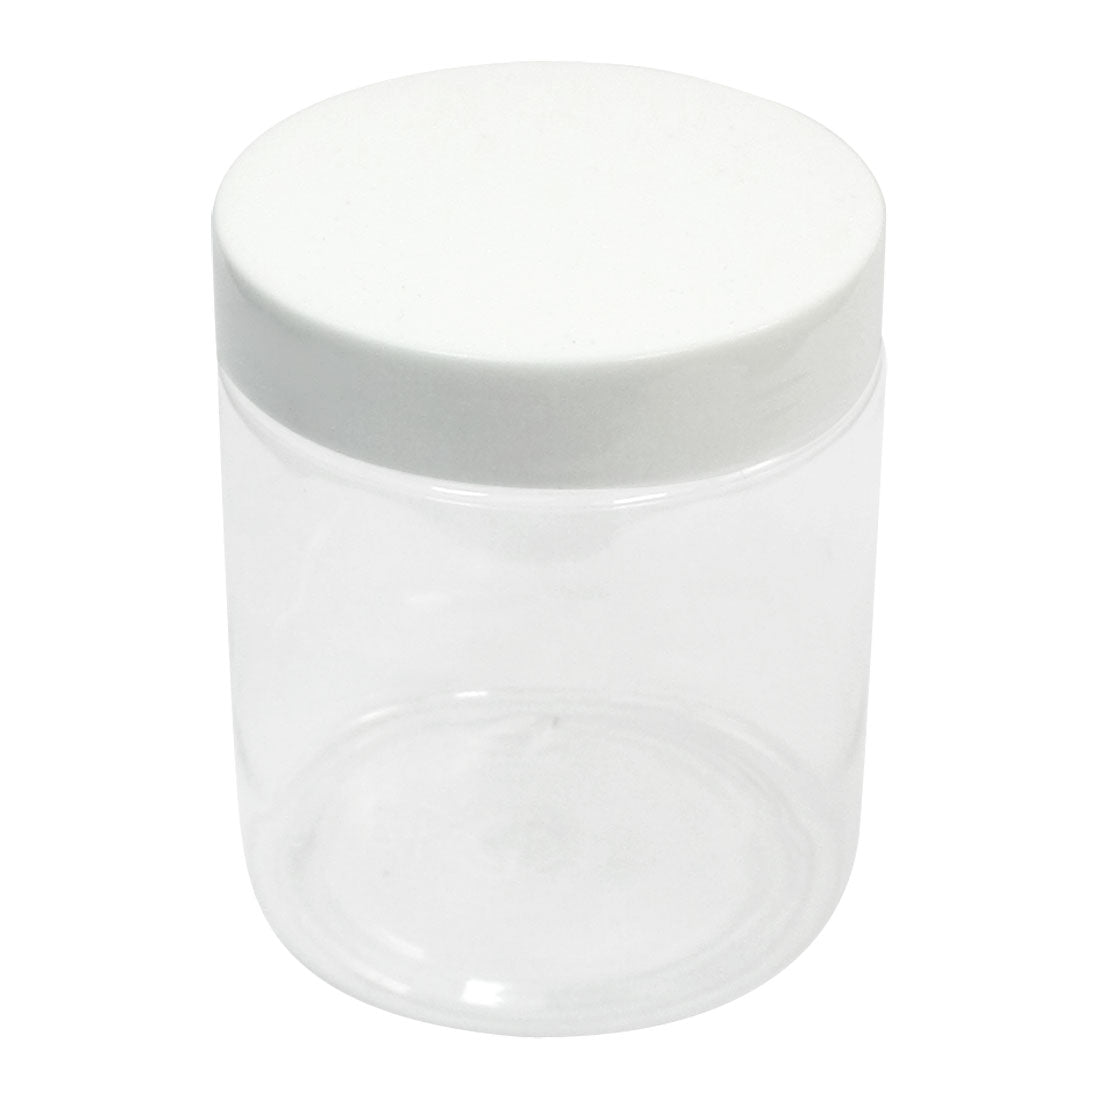 uxcell Uxcell 250ml Capacity 60mm Dia Mouth 8.5cm x 7cm White Clear Plastic Cylinder Body Plastic Widemouth  Chemical Reagent Storage Jar Bottle for Laboratory